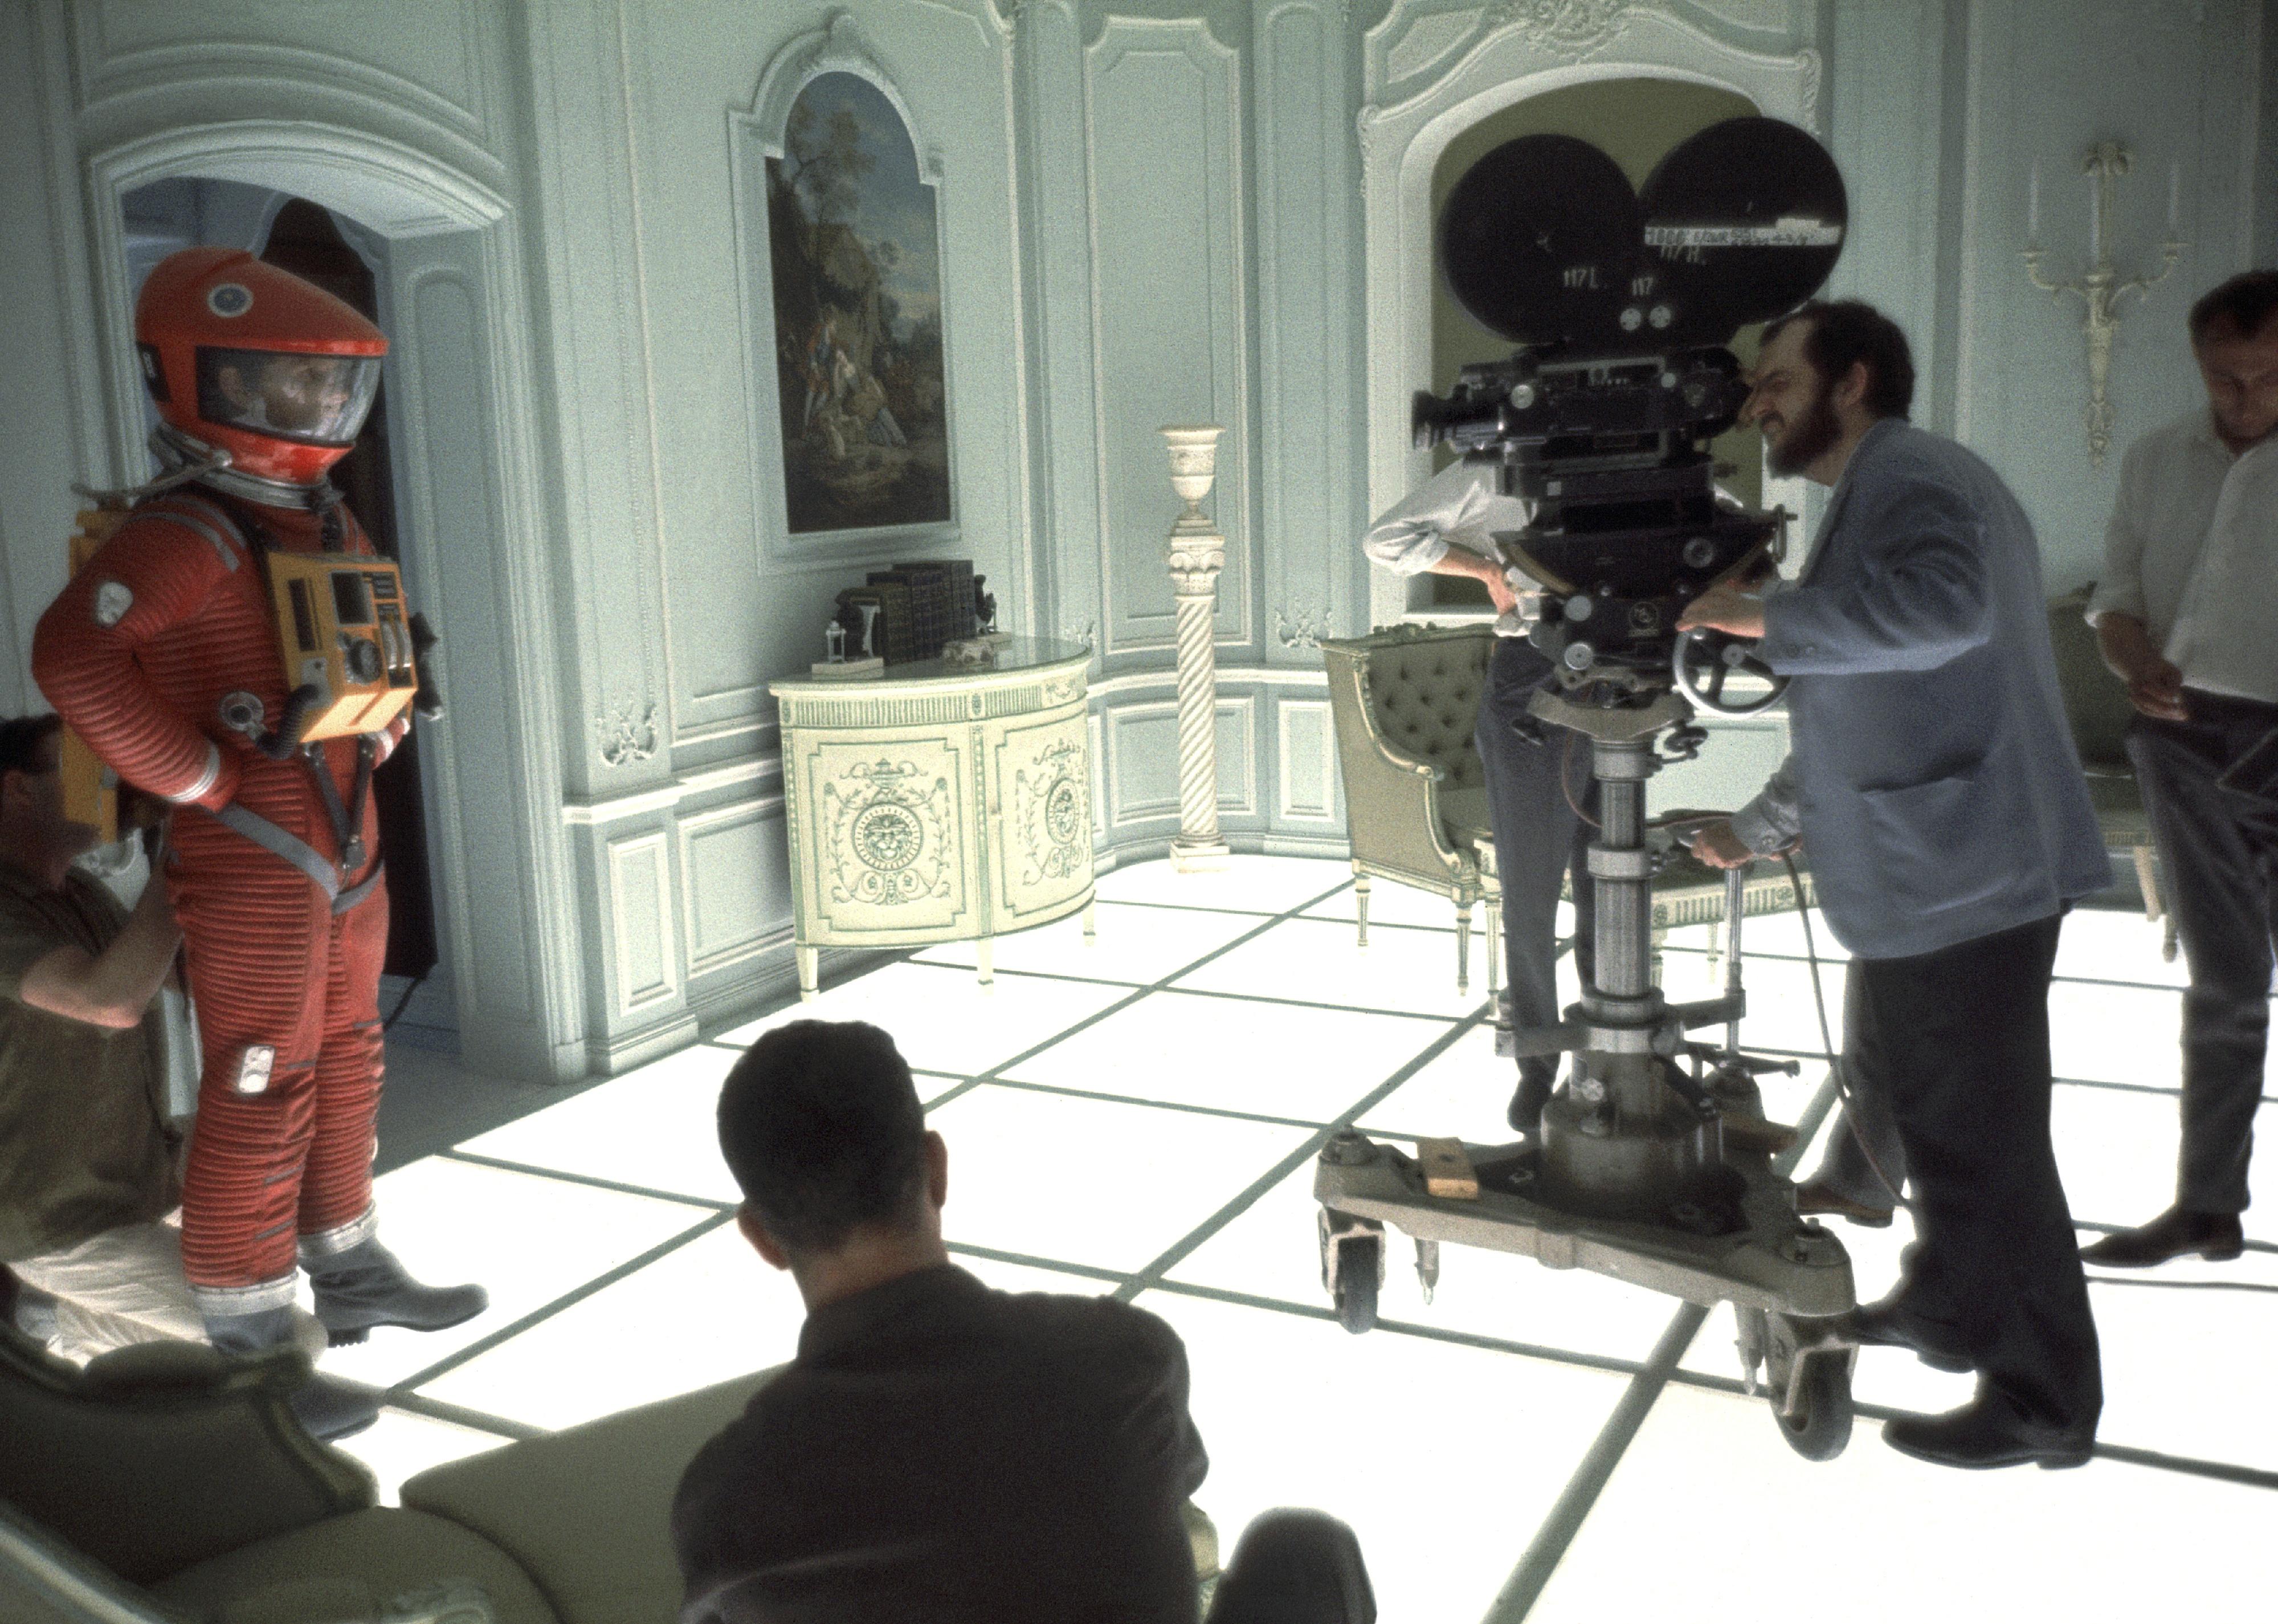 Film director and screenwriter Stanley Kubrick finds his shot on the set of '2001: A Space Odyssey'.